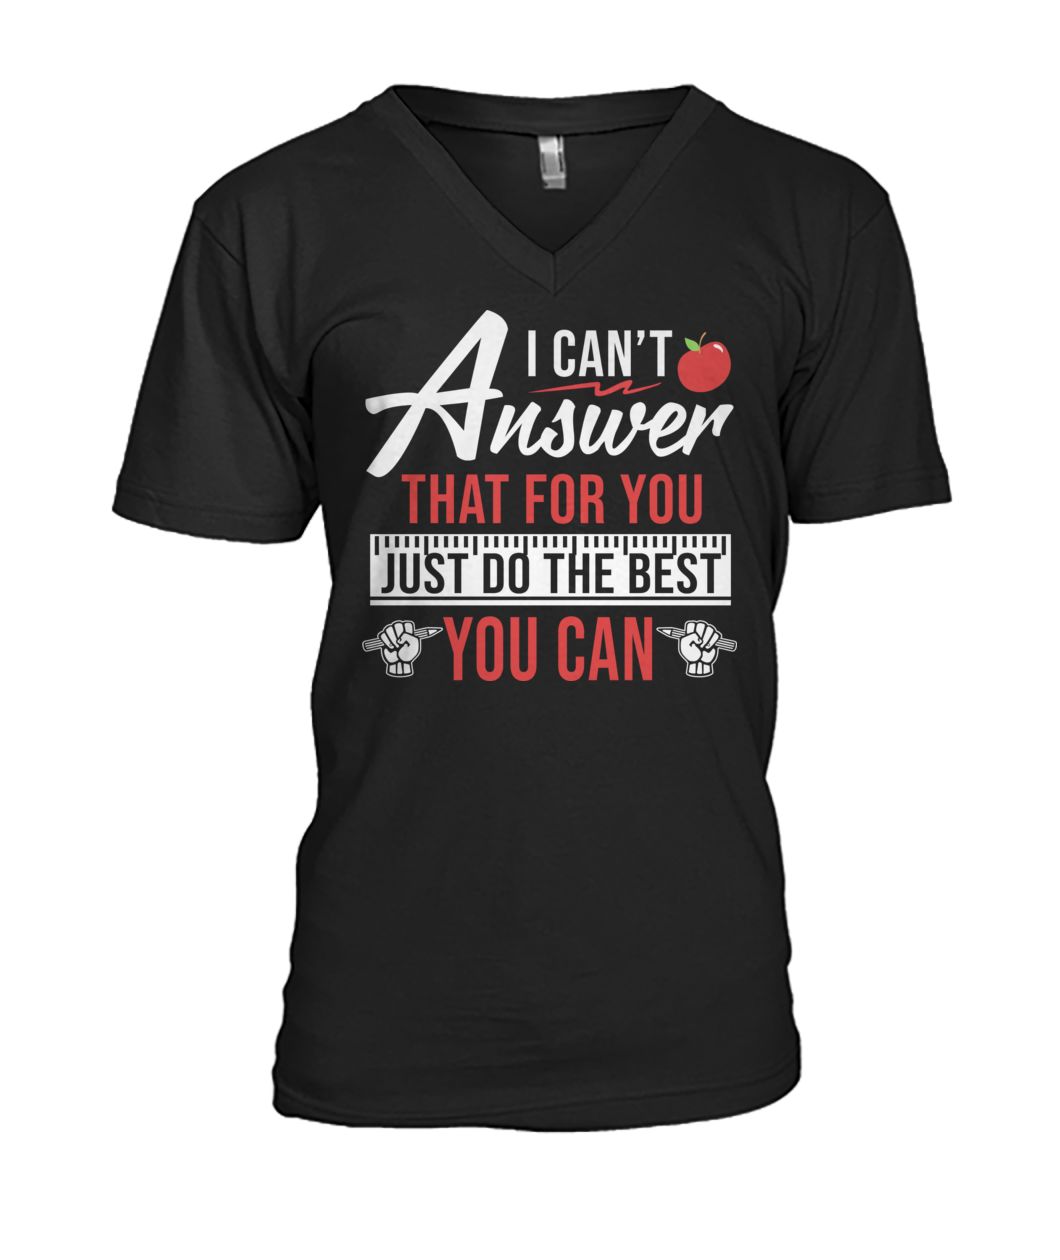 I can't answer that for you just do the best you can mens v-neck